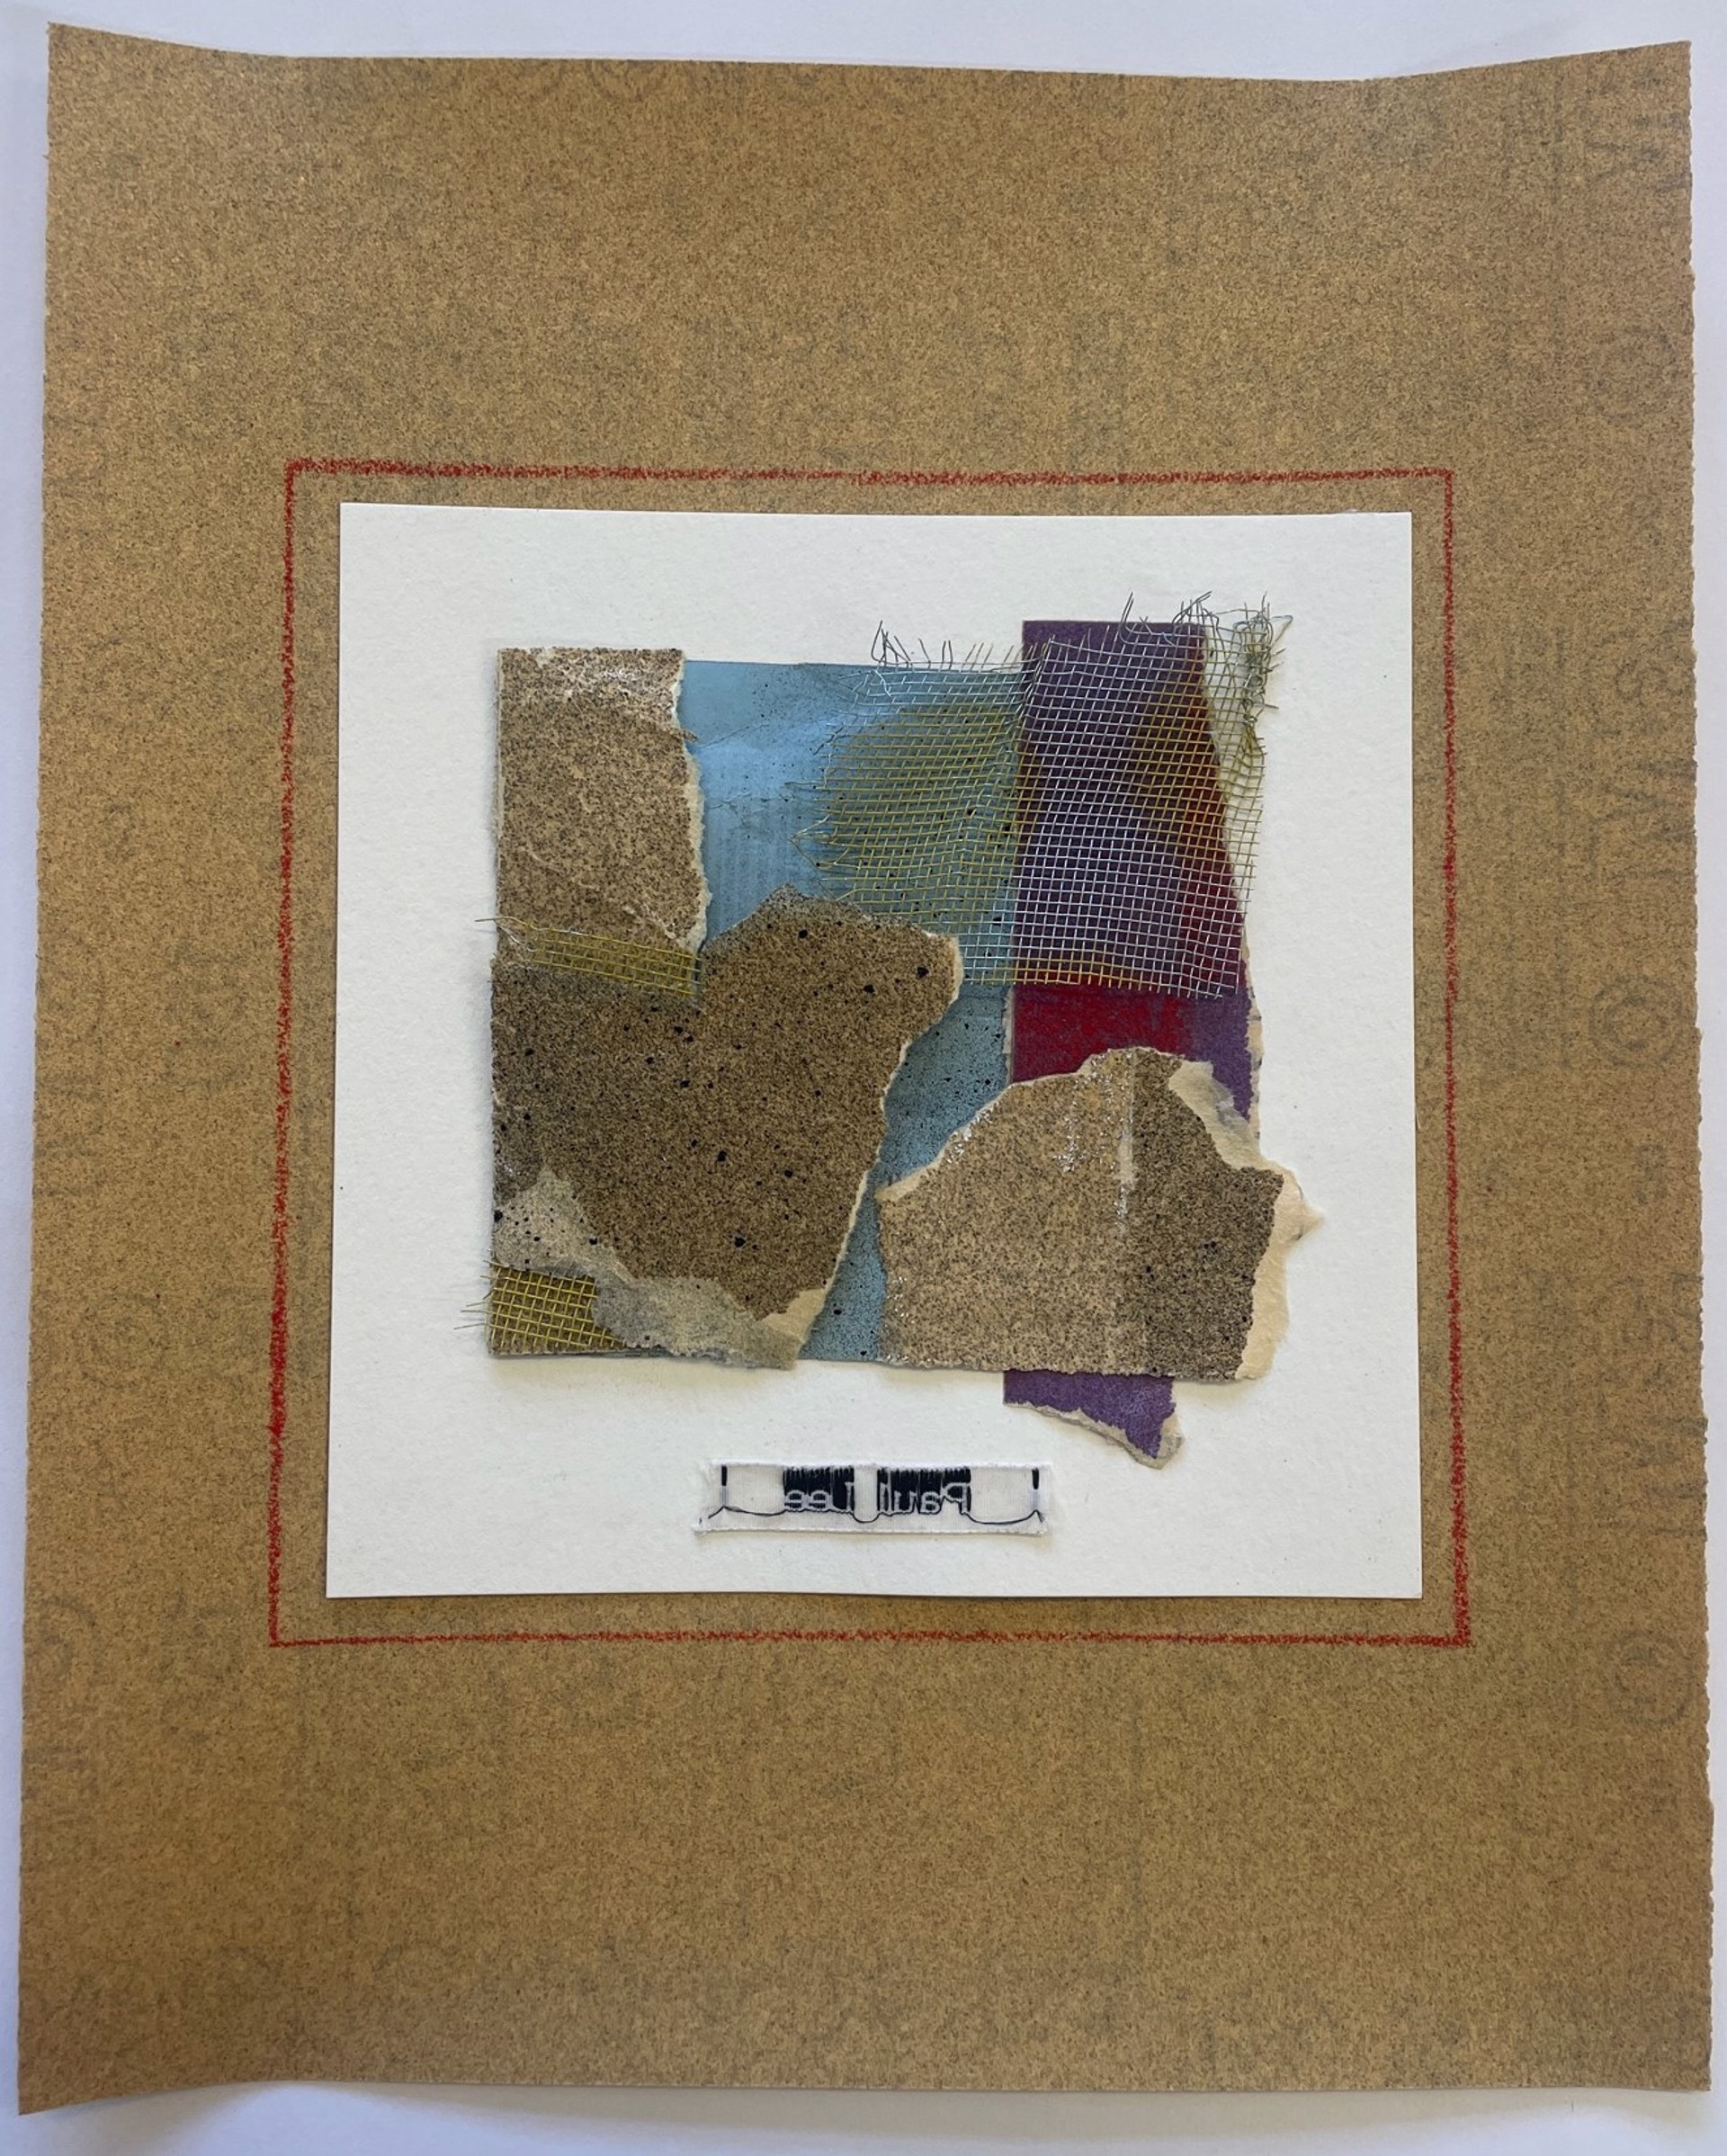 Sandpaper Collage No. 10 by Paul Lee